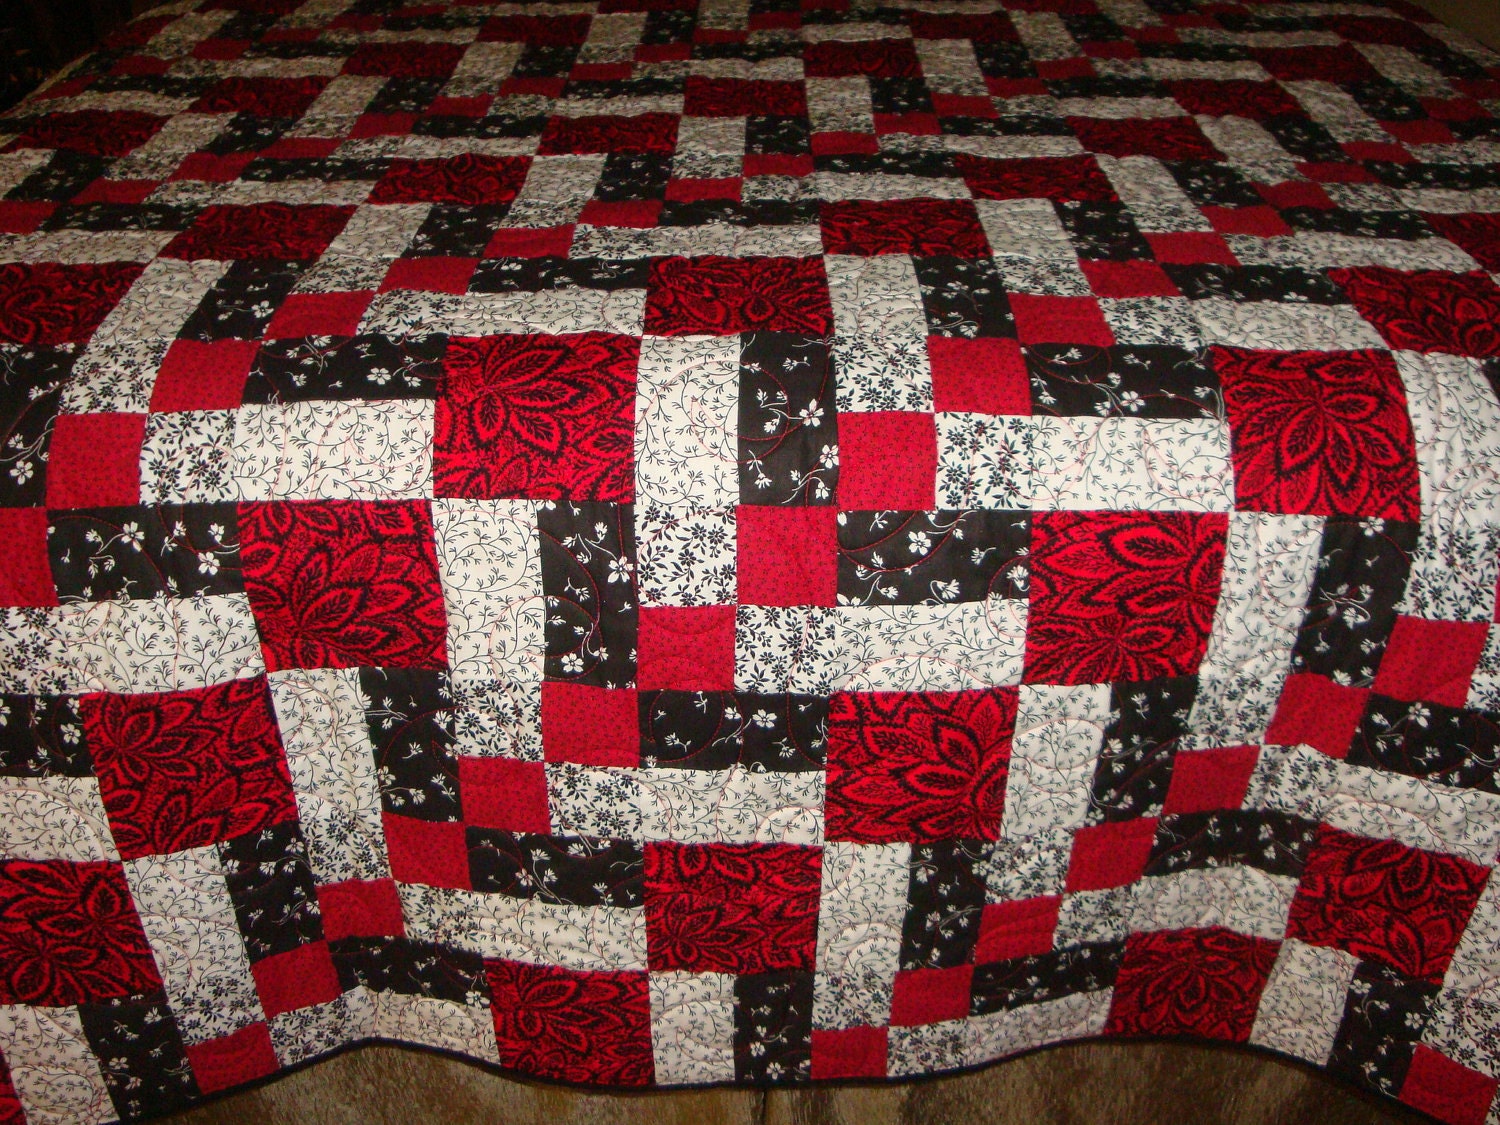 Black and white quilt ideas